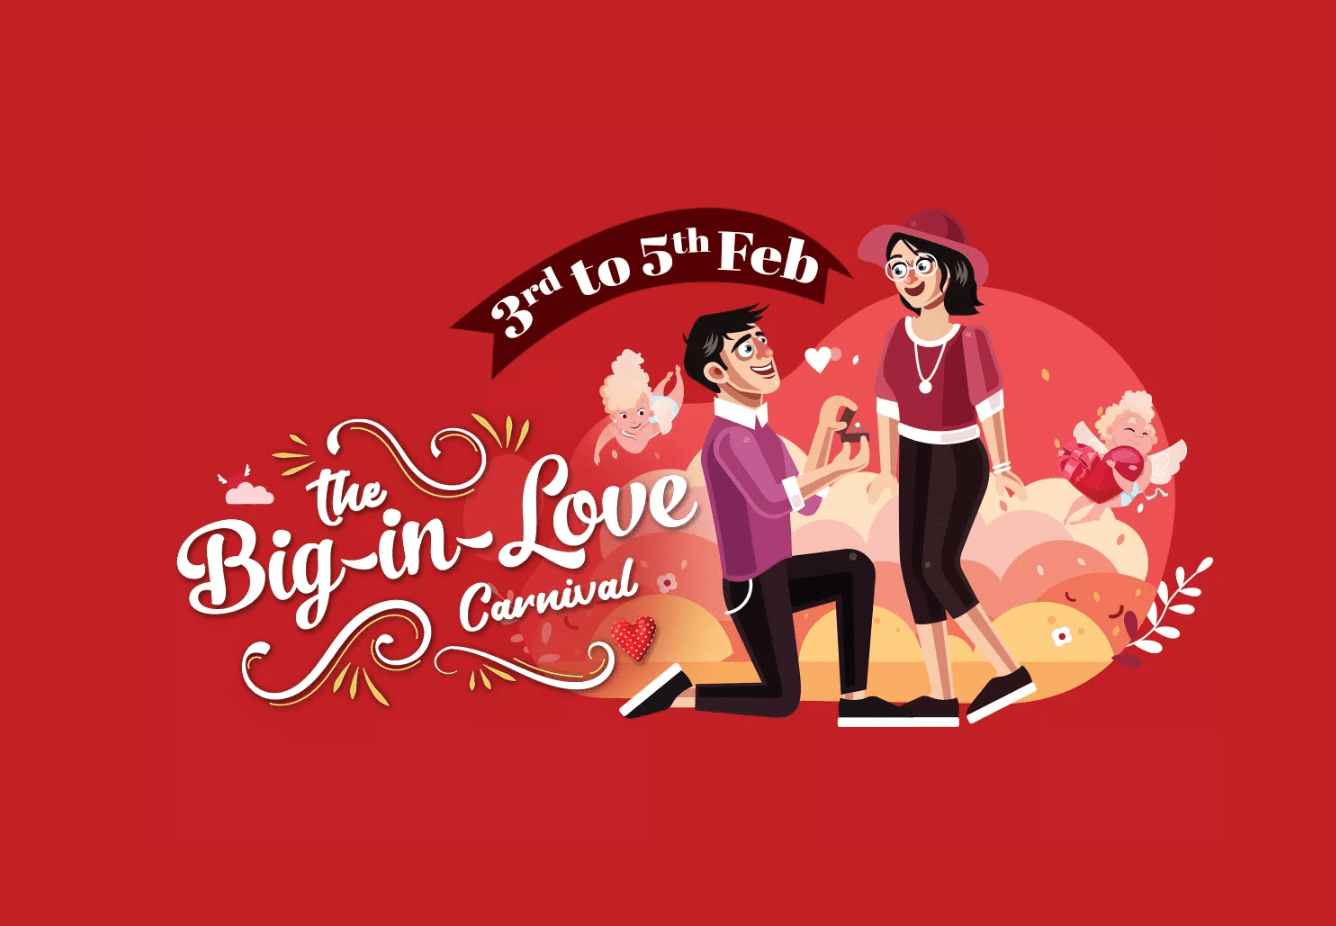 Valentine’s Exclusive Sale: The Big-in-Love Carnival is COMING SOON!